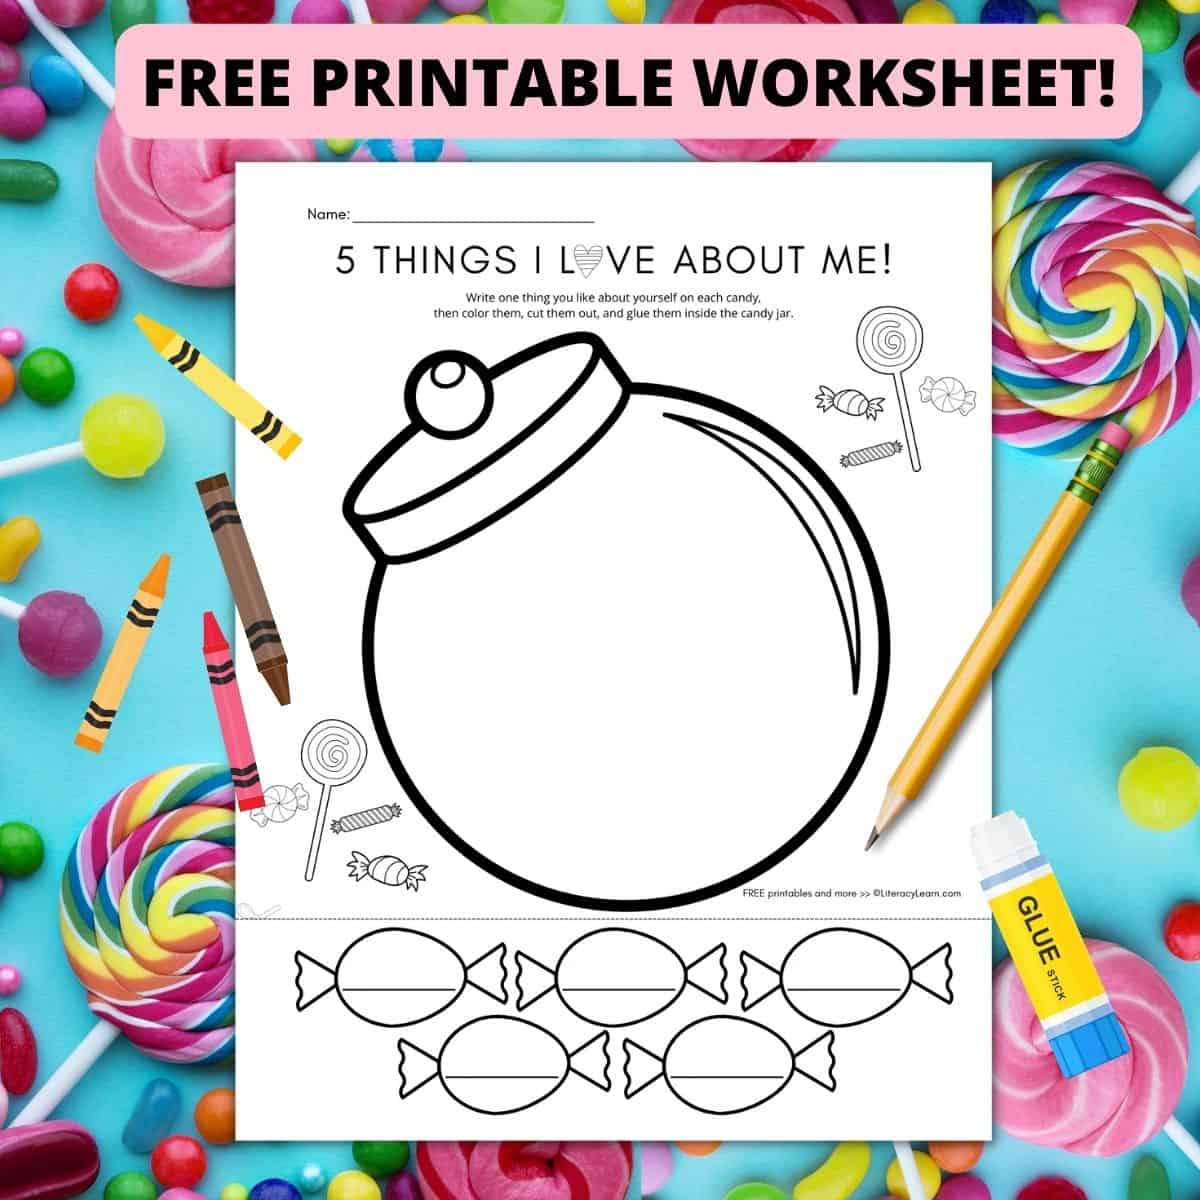 Graphic with the candy jar worksheet on a candy-themed background.